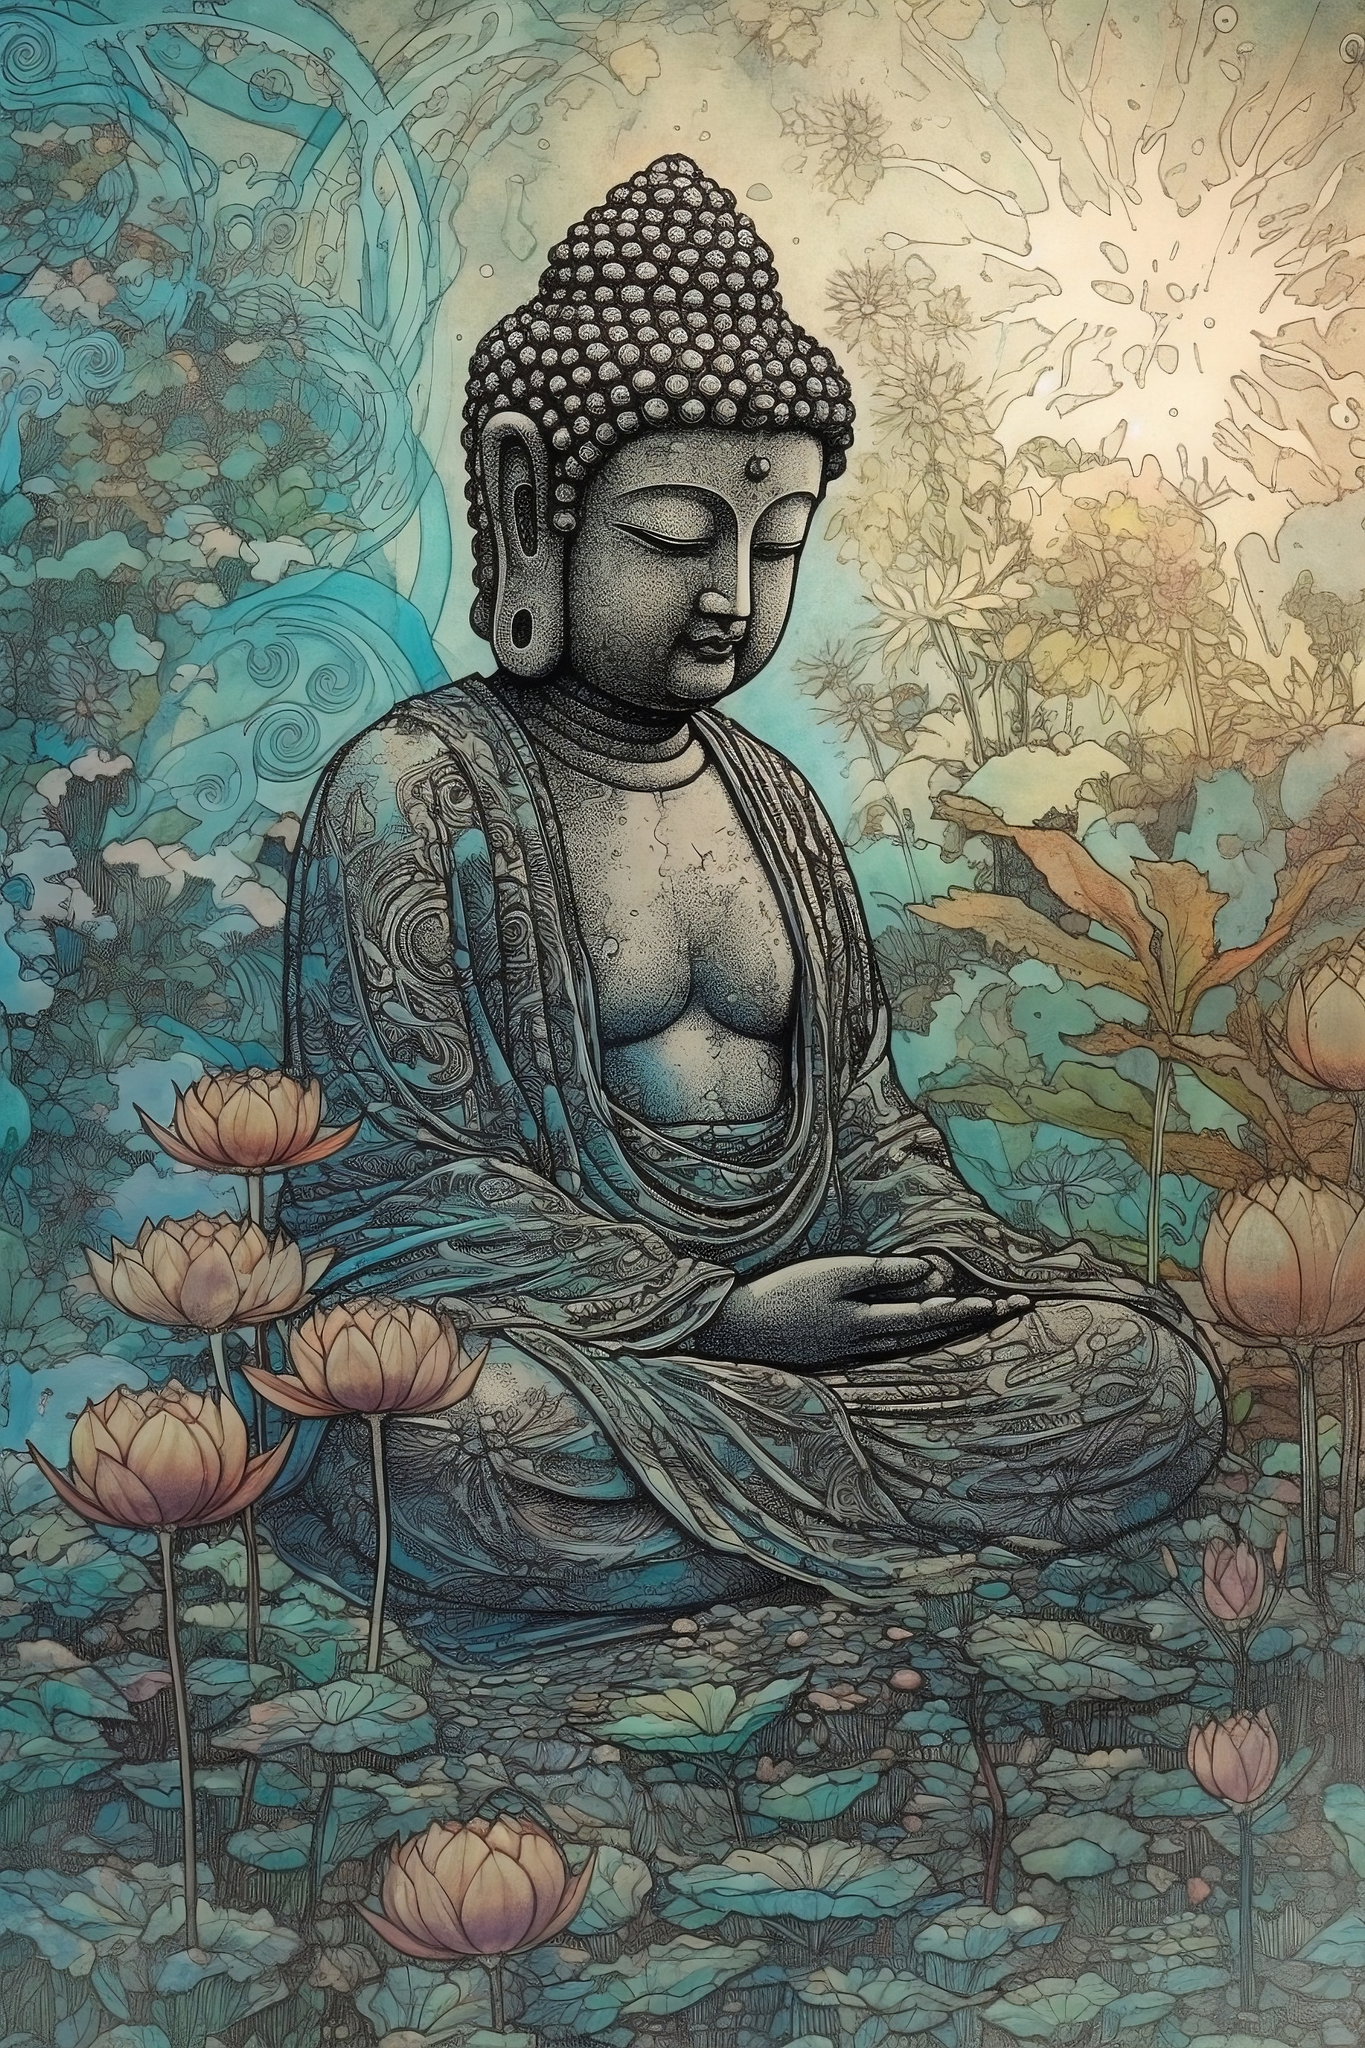 The Lord Buddha Print in Contemporary Art Nouveau Style by Akihiko Yoshida, with Flower Field Background